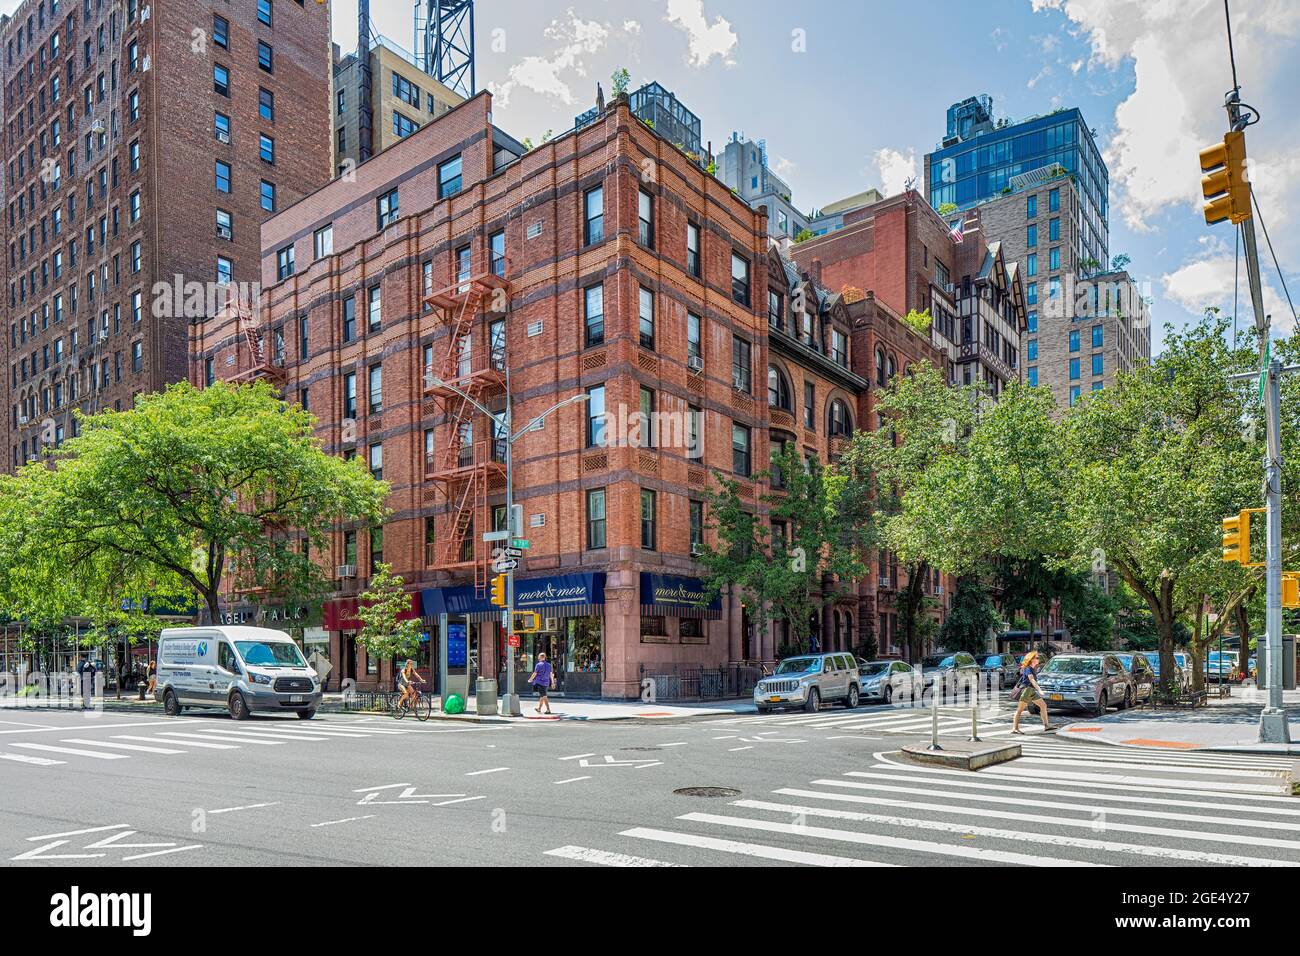 200 West 78th Street is an engaging brick-and-brownstone apartment house on the corner of Amsterdam Avenue. The modern penthouse was a late addition. Stock Photo